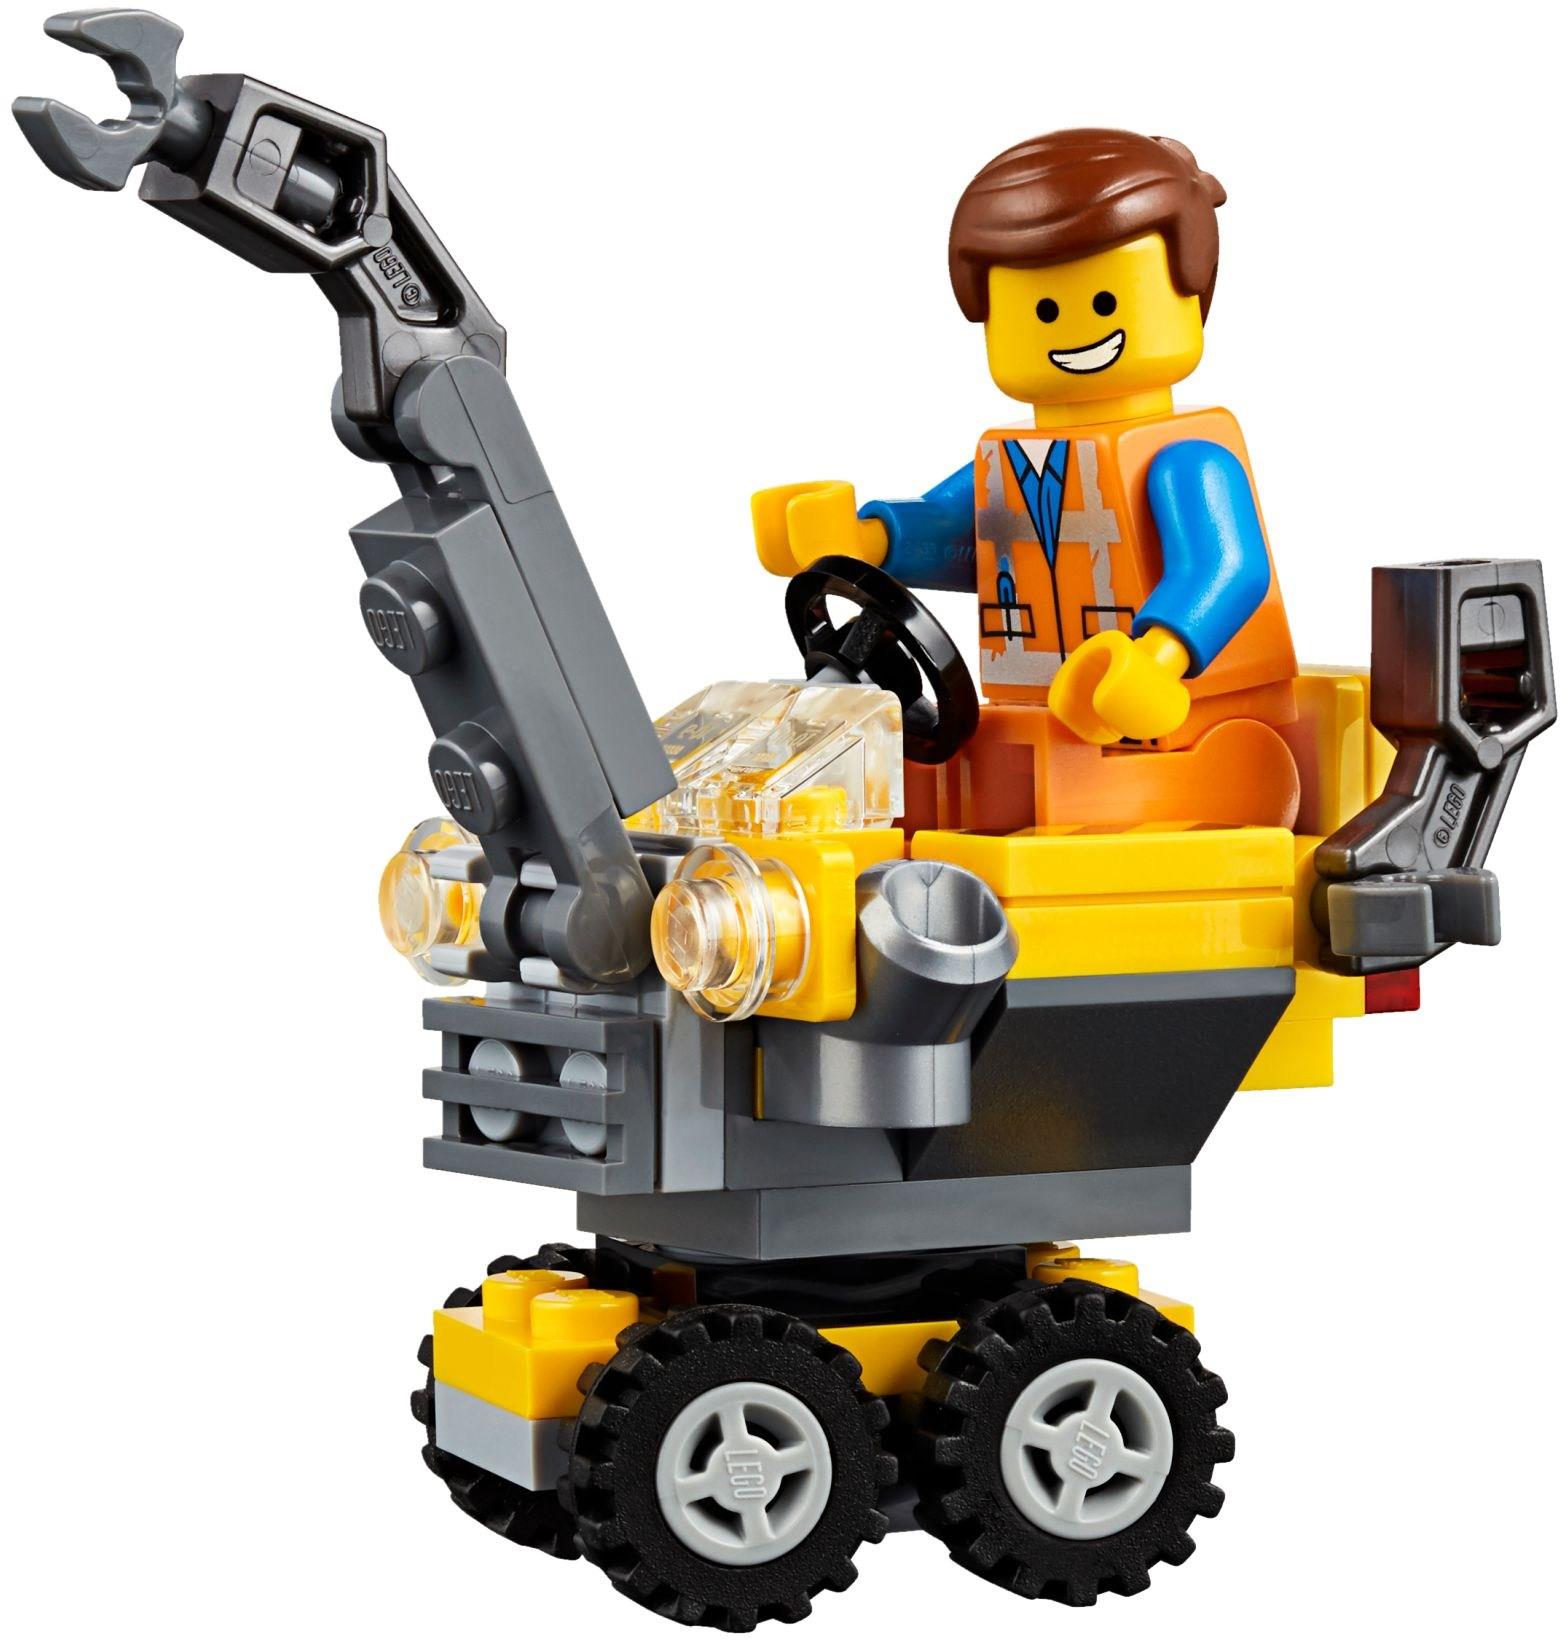 NEW LEGO The Lego Movie 2 Emmet Minifigure from 70823 tlm125 